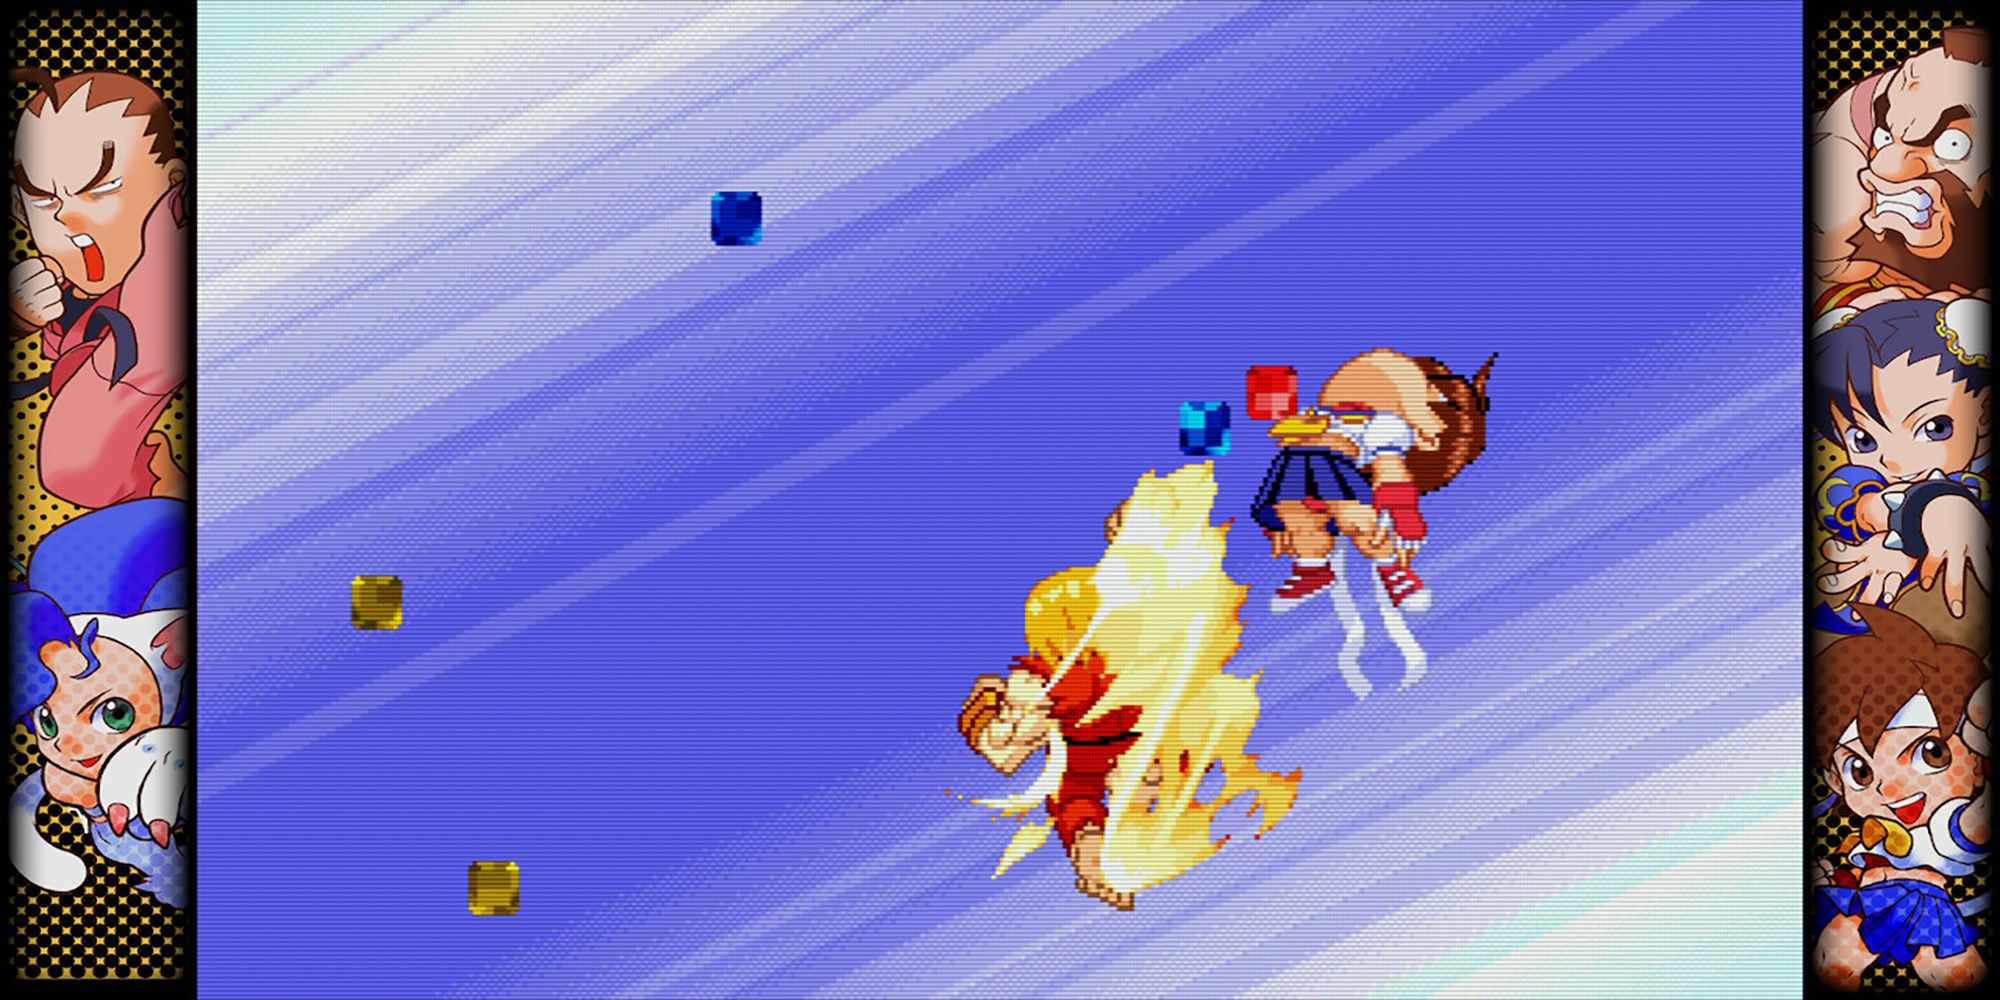 Ken takes out Sakura with Shoryureppa Mighty Combo finish in Pocket Fighter, a game in Capcom Fighting Collection.